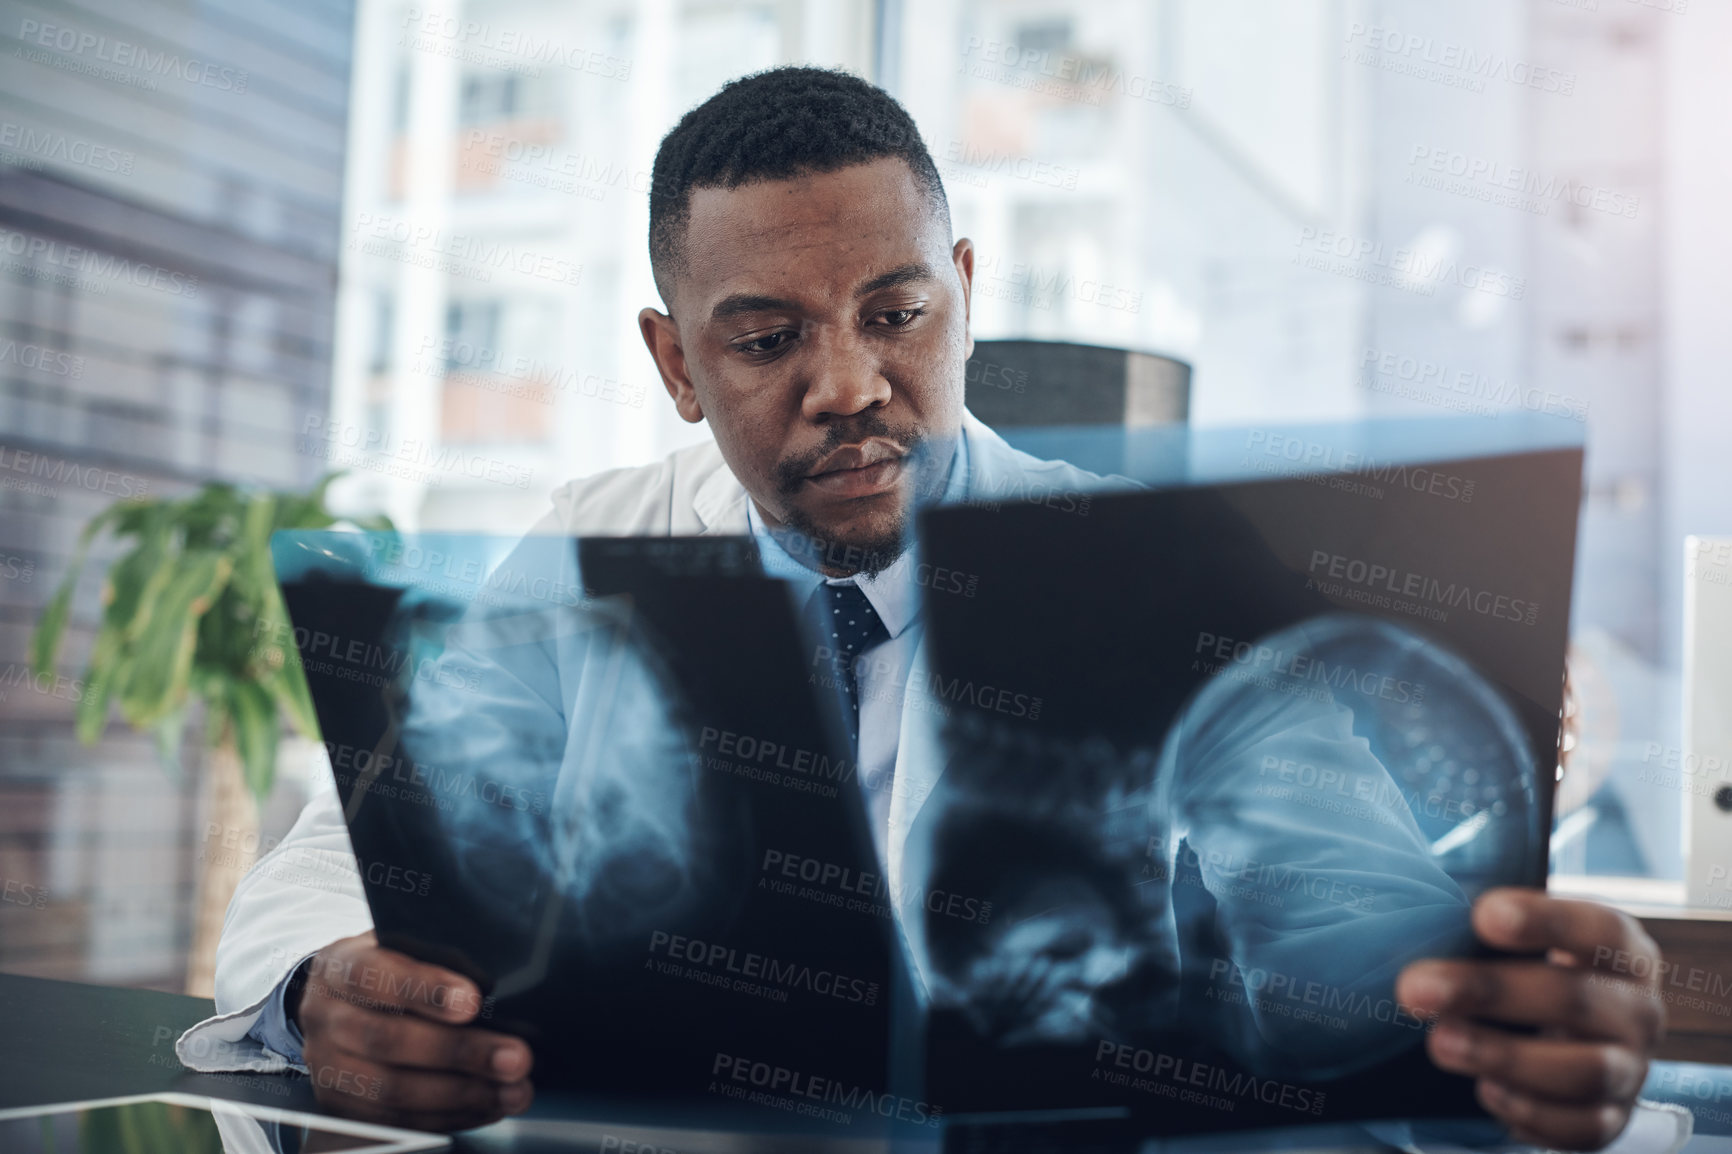 Buy stock photo Review, black man and doctor with brain scan for diagnosis, check results or ideas in hospital. Neurology, healthcare and surgeon with xray for assessment, decision or planning treatment on injury